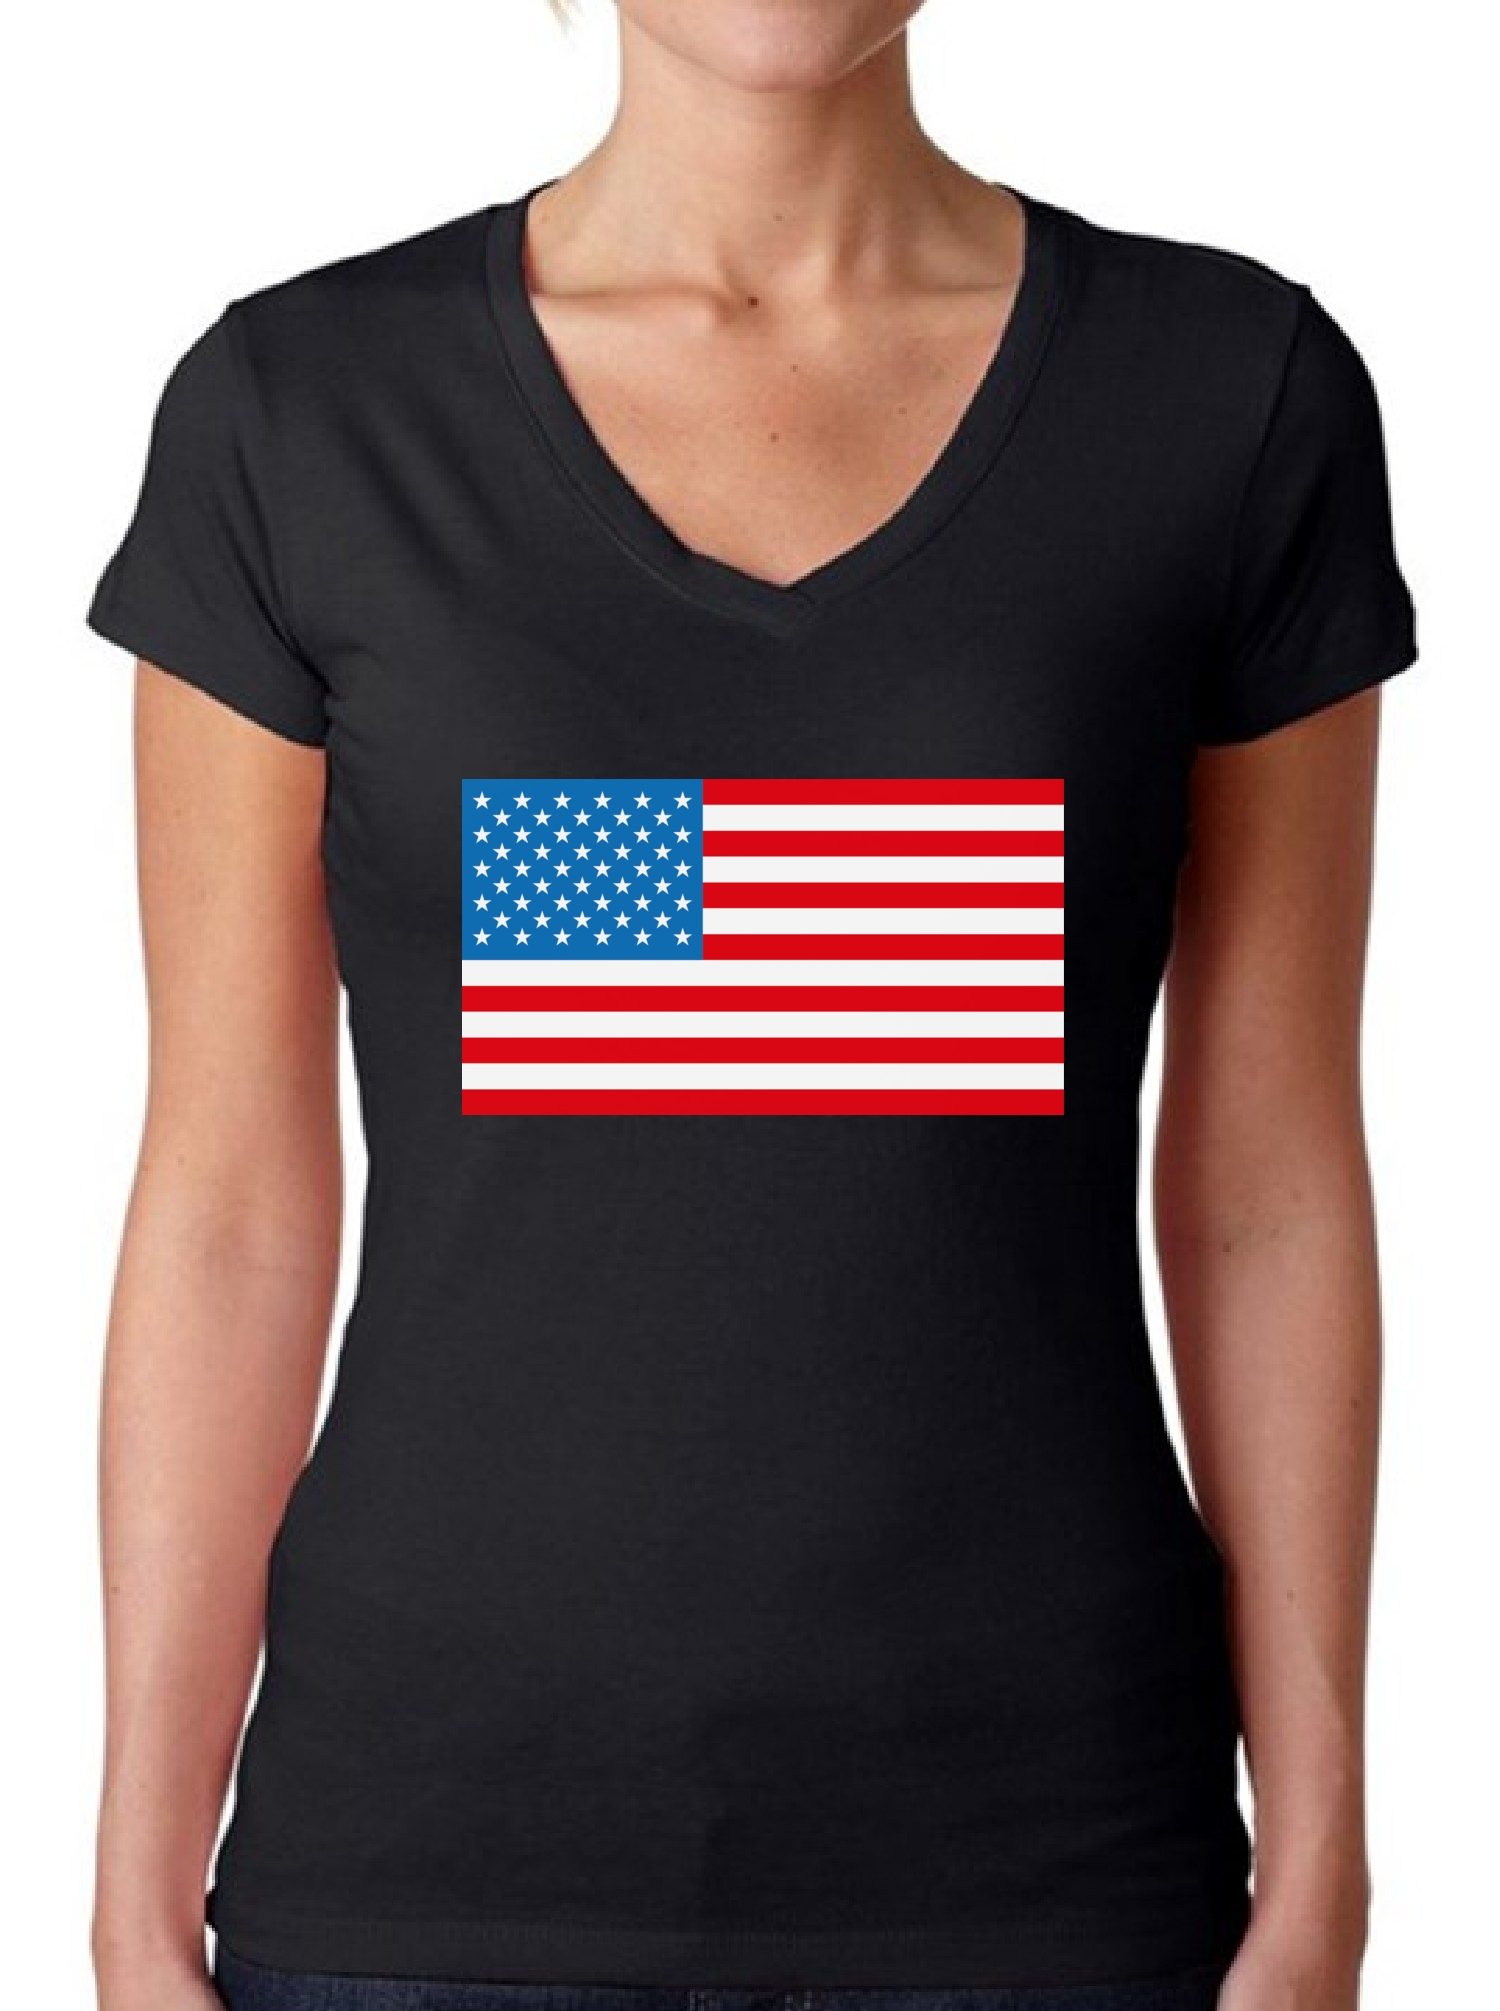 USA Flag Women's V-neck T shirt Tops Patriotic 4th of July Independence ...